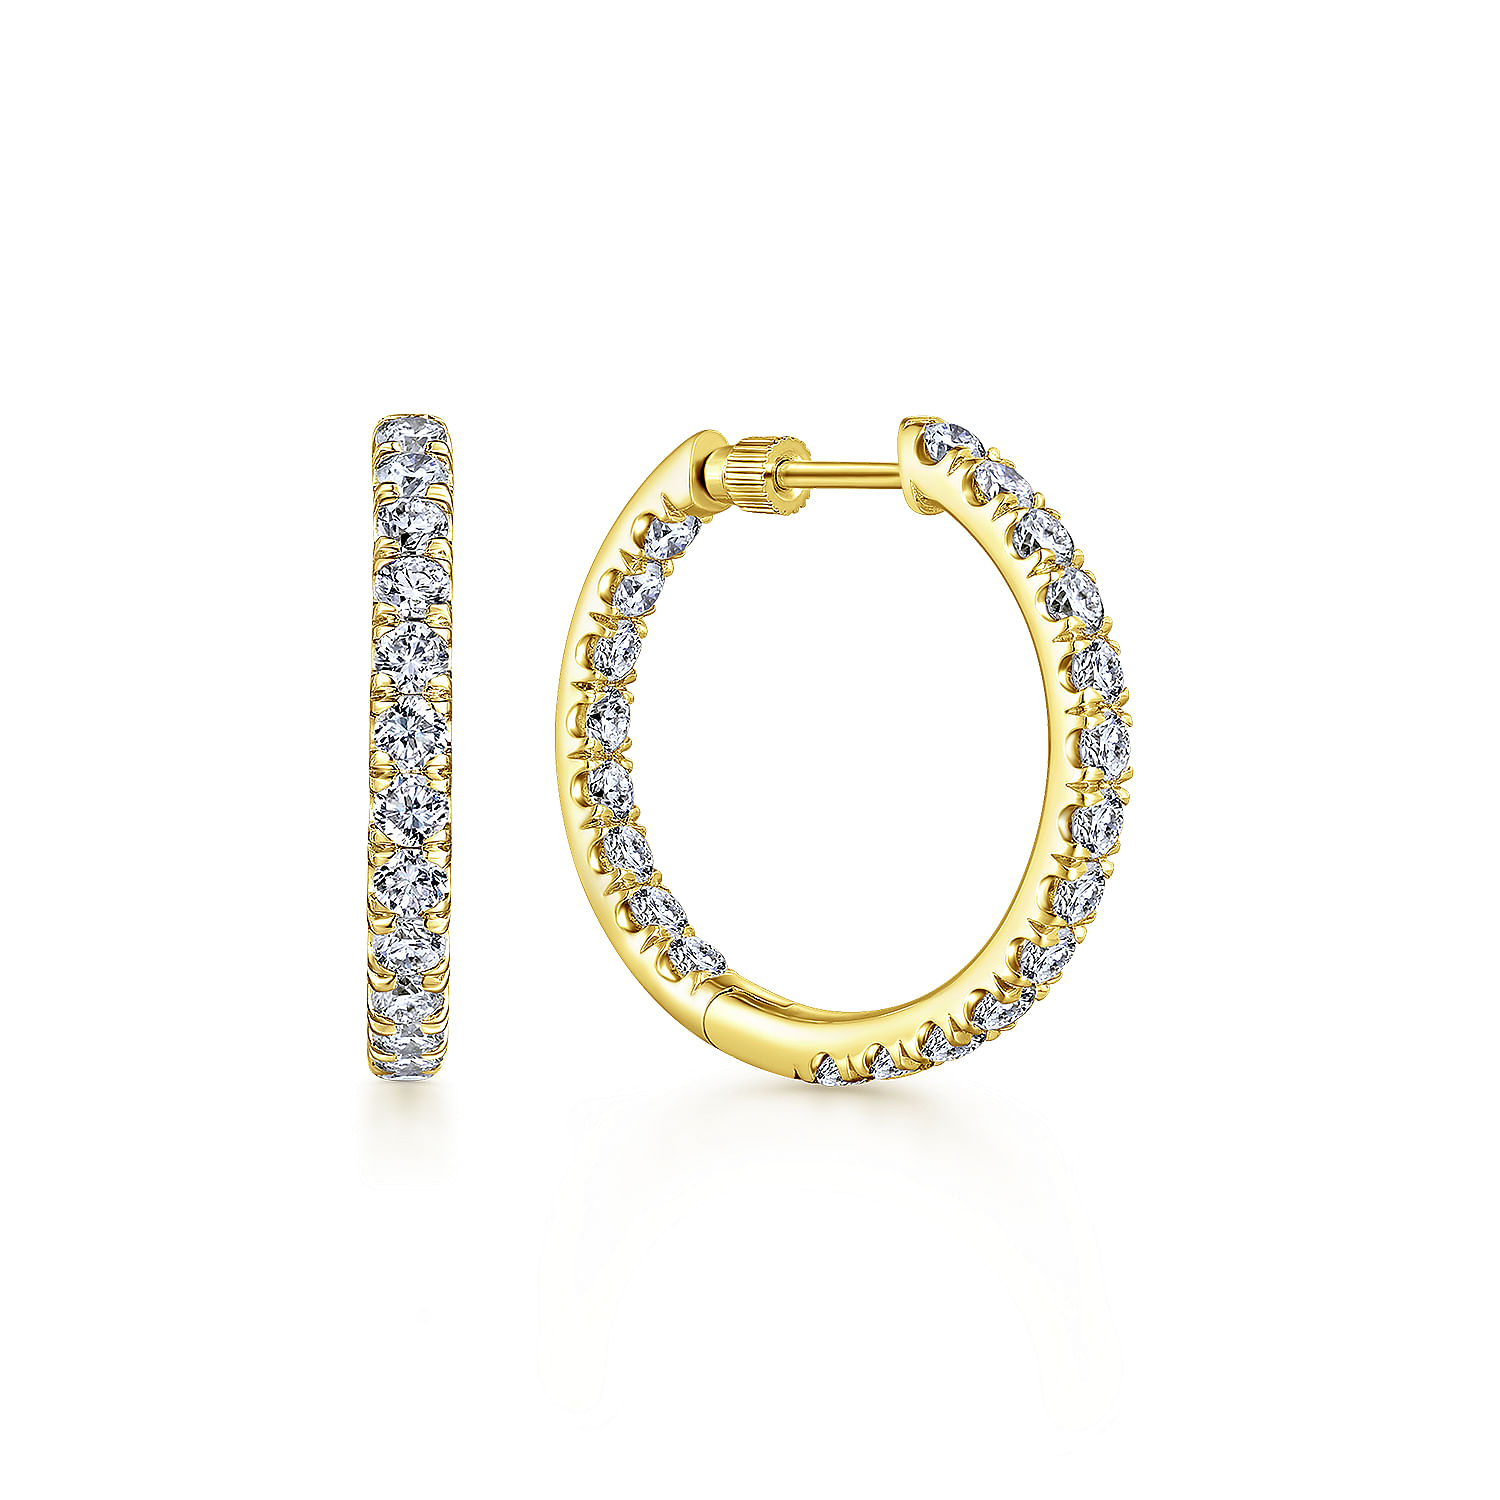 14K Yellow Gold French Pave 20mm Round Inside Out Diamond Hoop Earrings